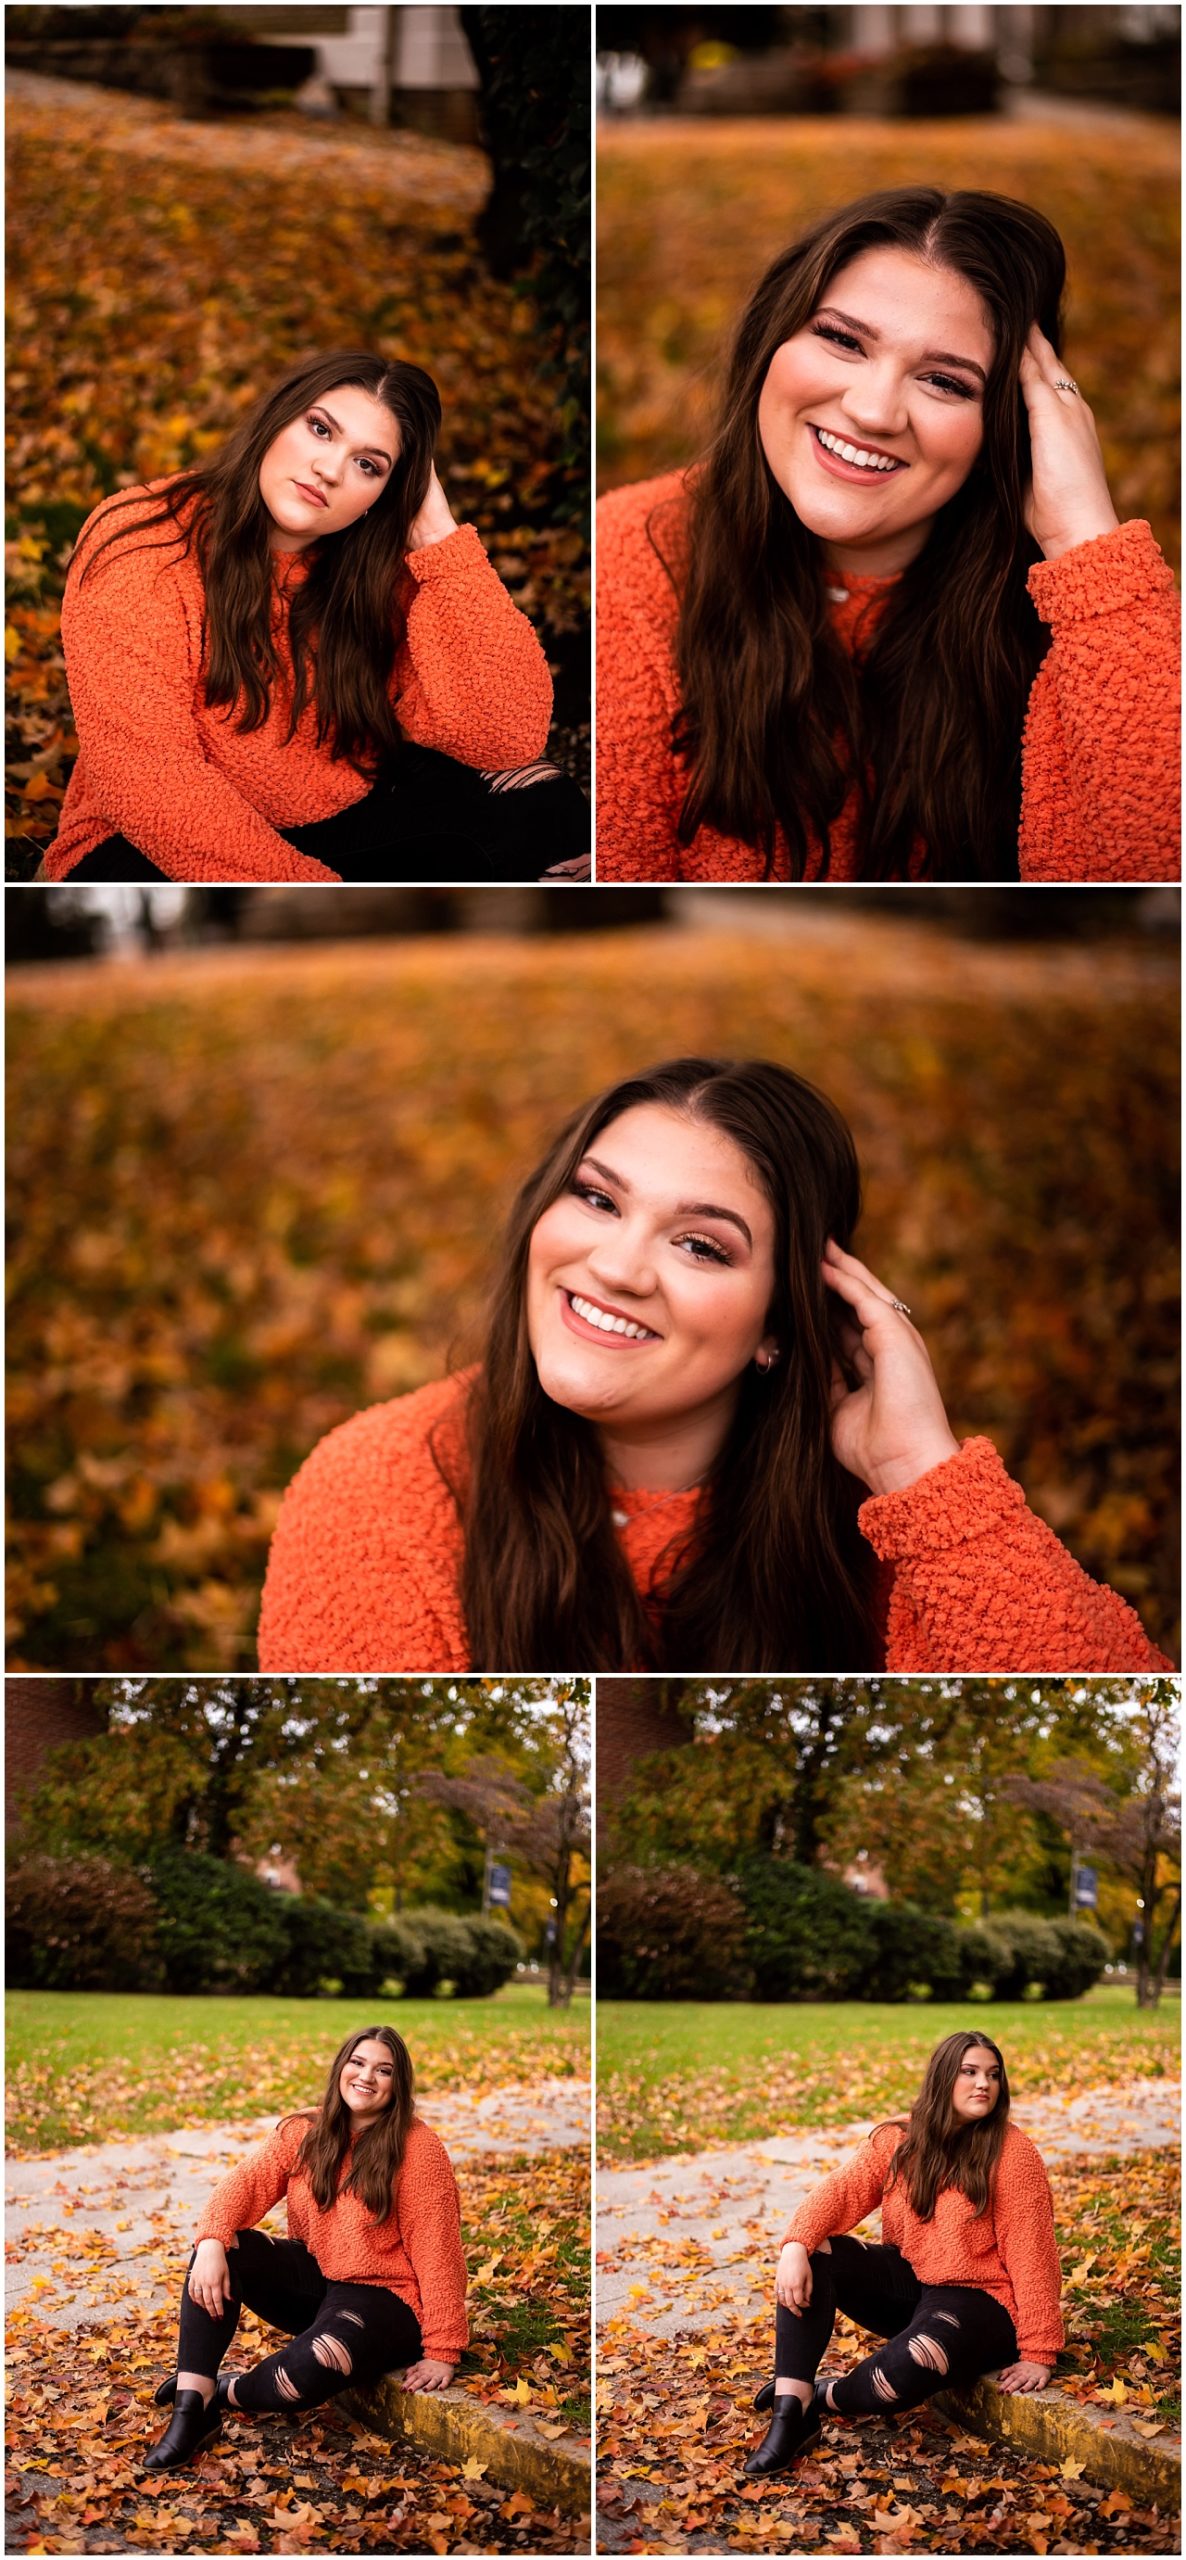 Senior photo taken by Rural Southern Photography of girl smiling at the camera in orange sweater sitting in the leaves and playing with her hair Knoxville, Tennessee.